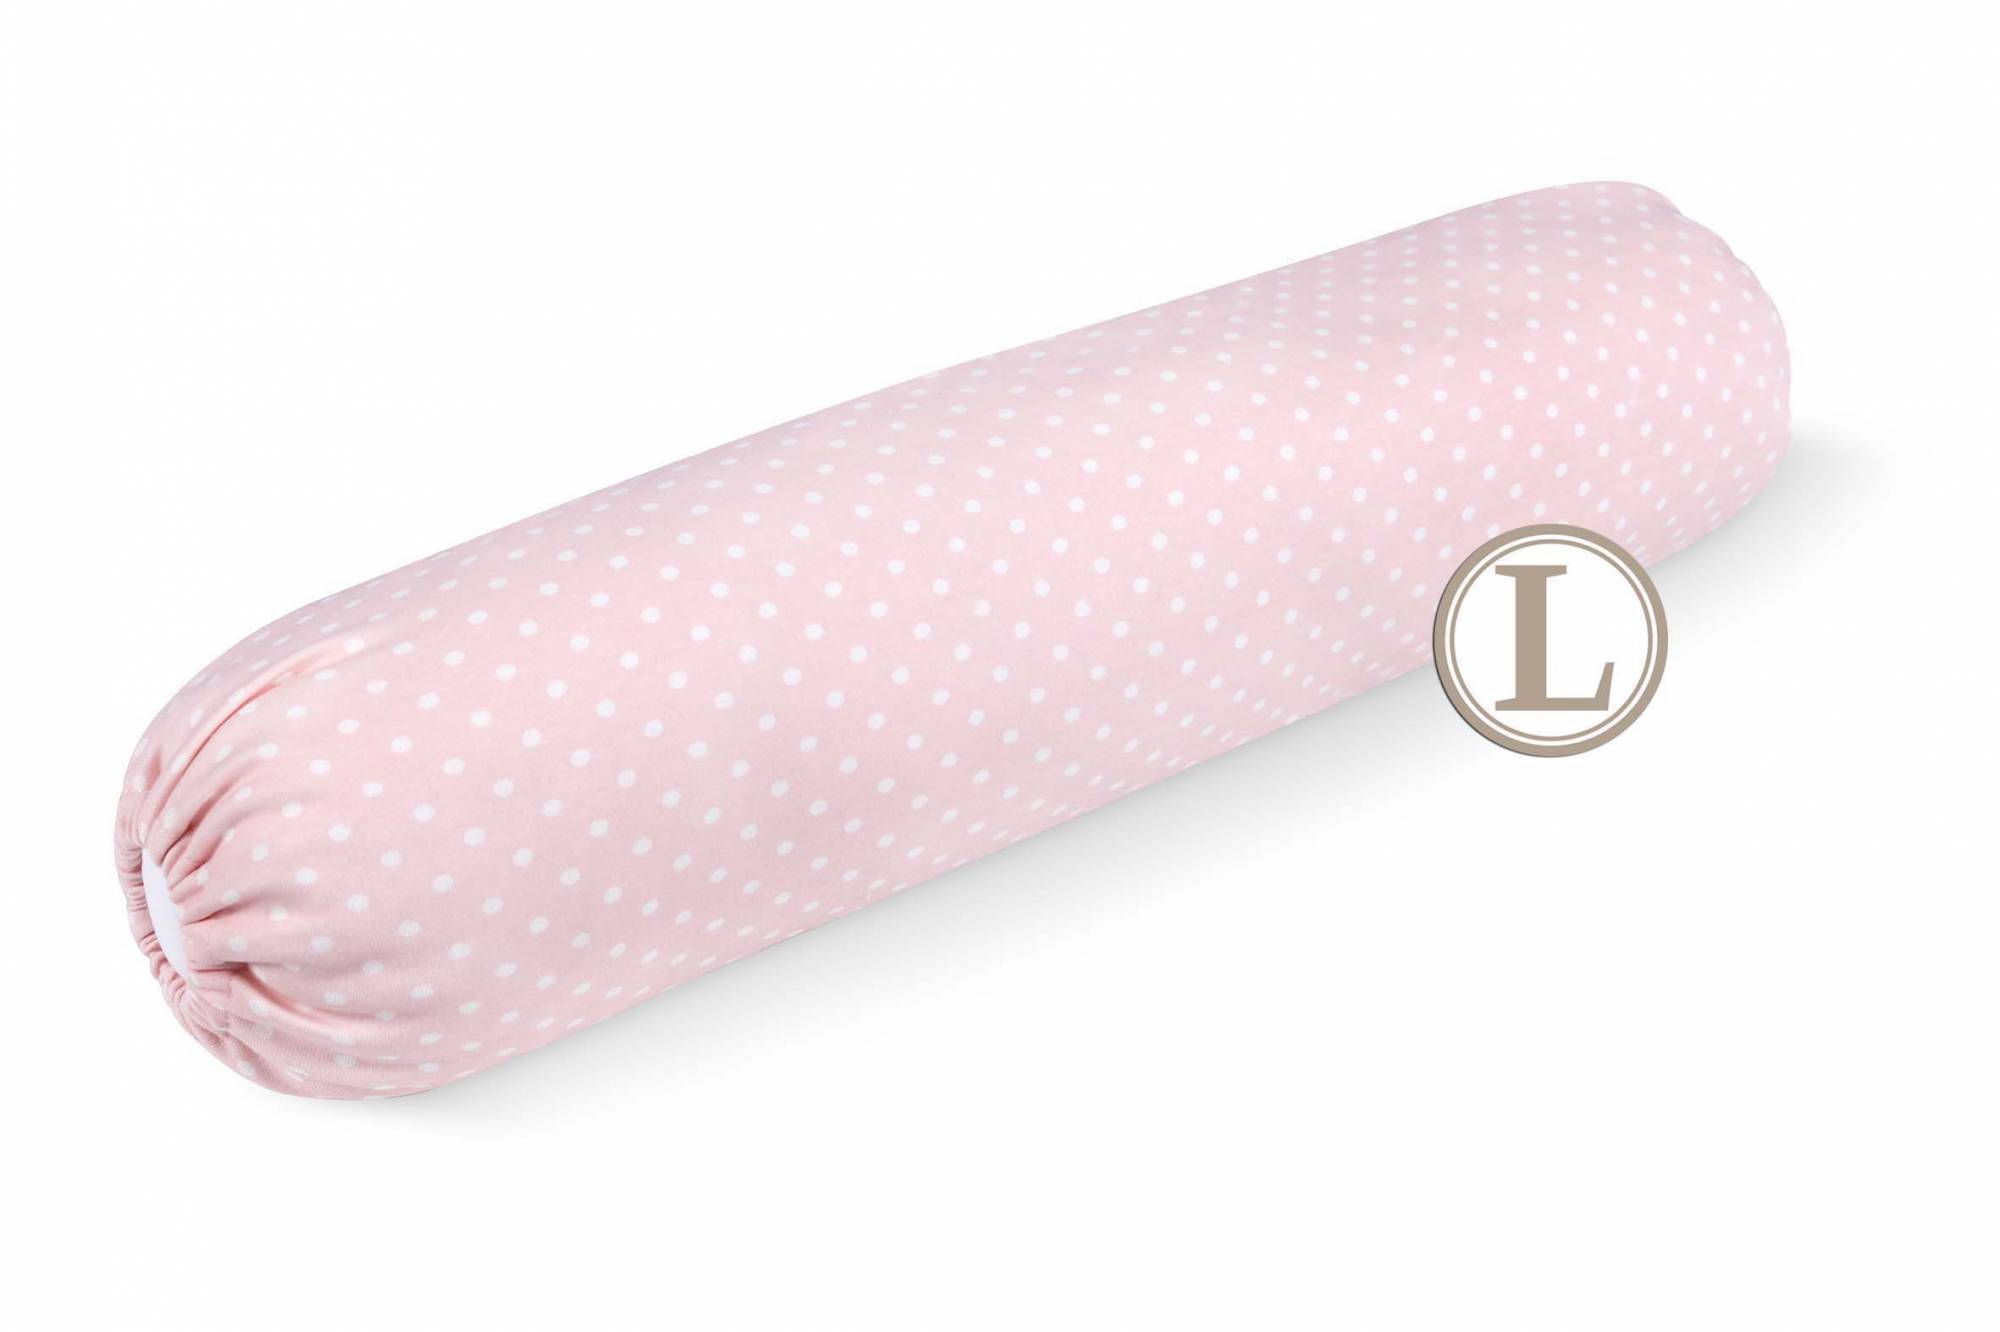 Comfy Living Baby Bolster Comfy Baby Bolster Size L